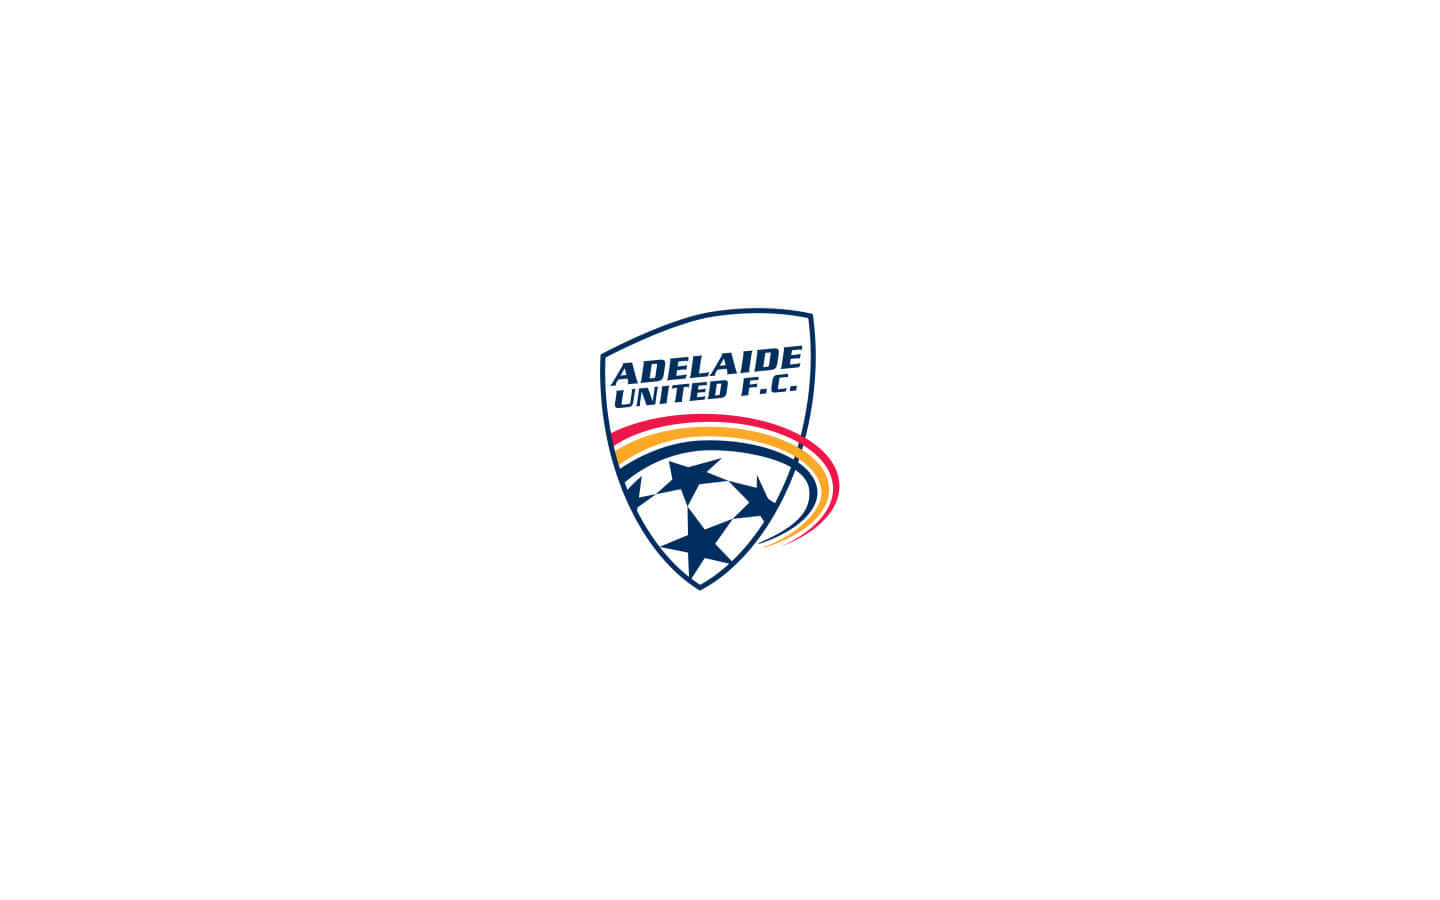 Adelaide United Football Club in action Wallpaper